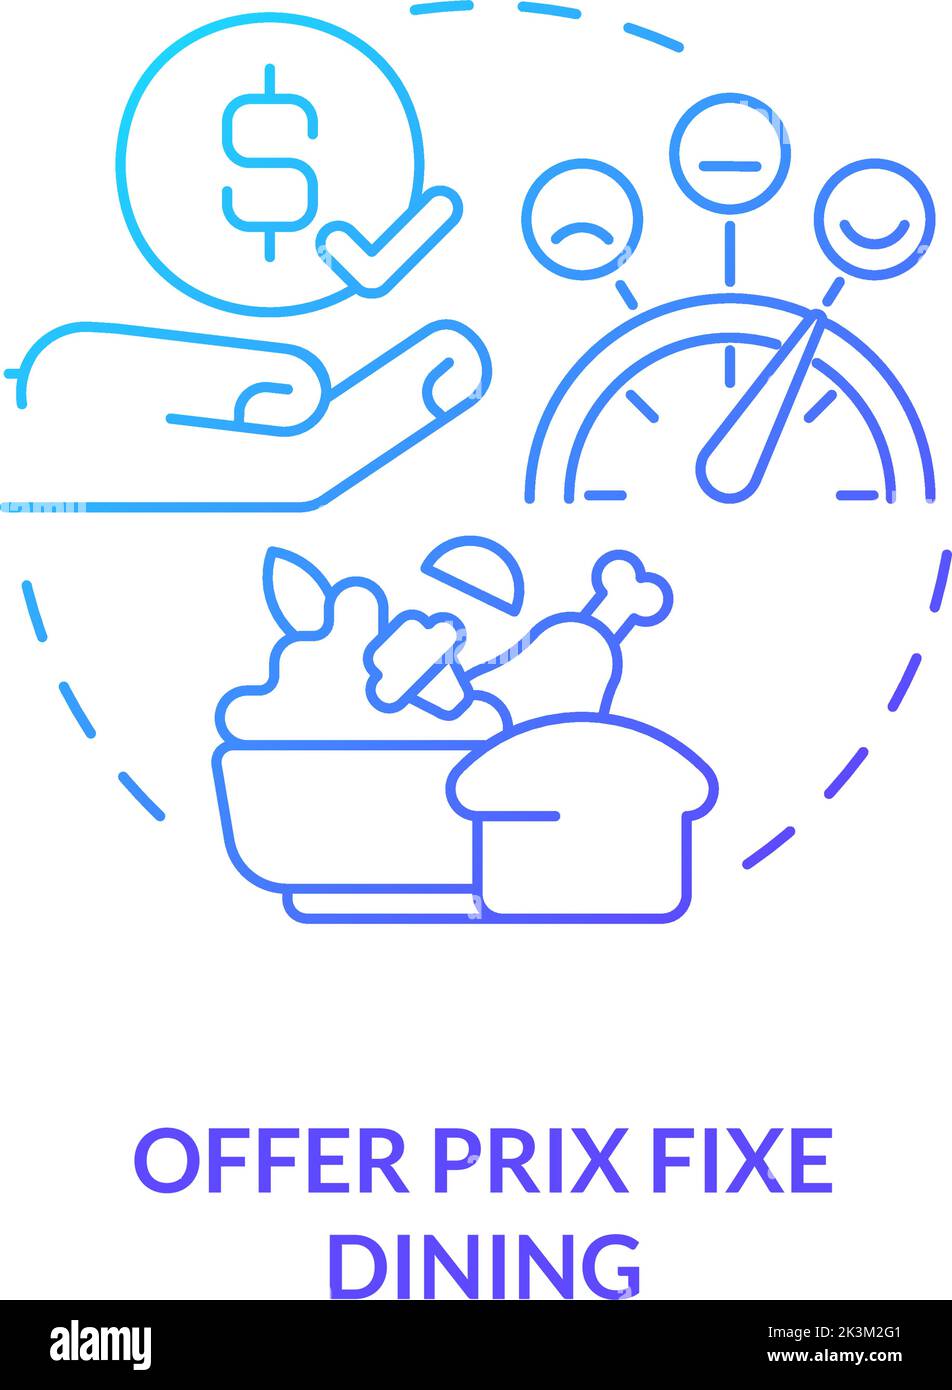 Offer prix fixe dining blue gradient concept icon Stock Vector